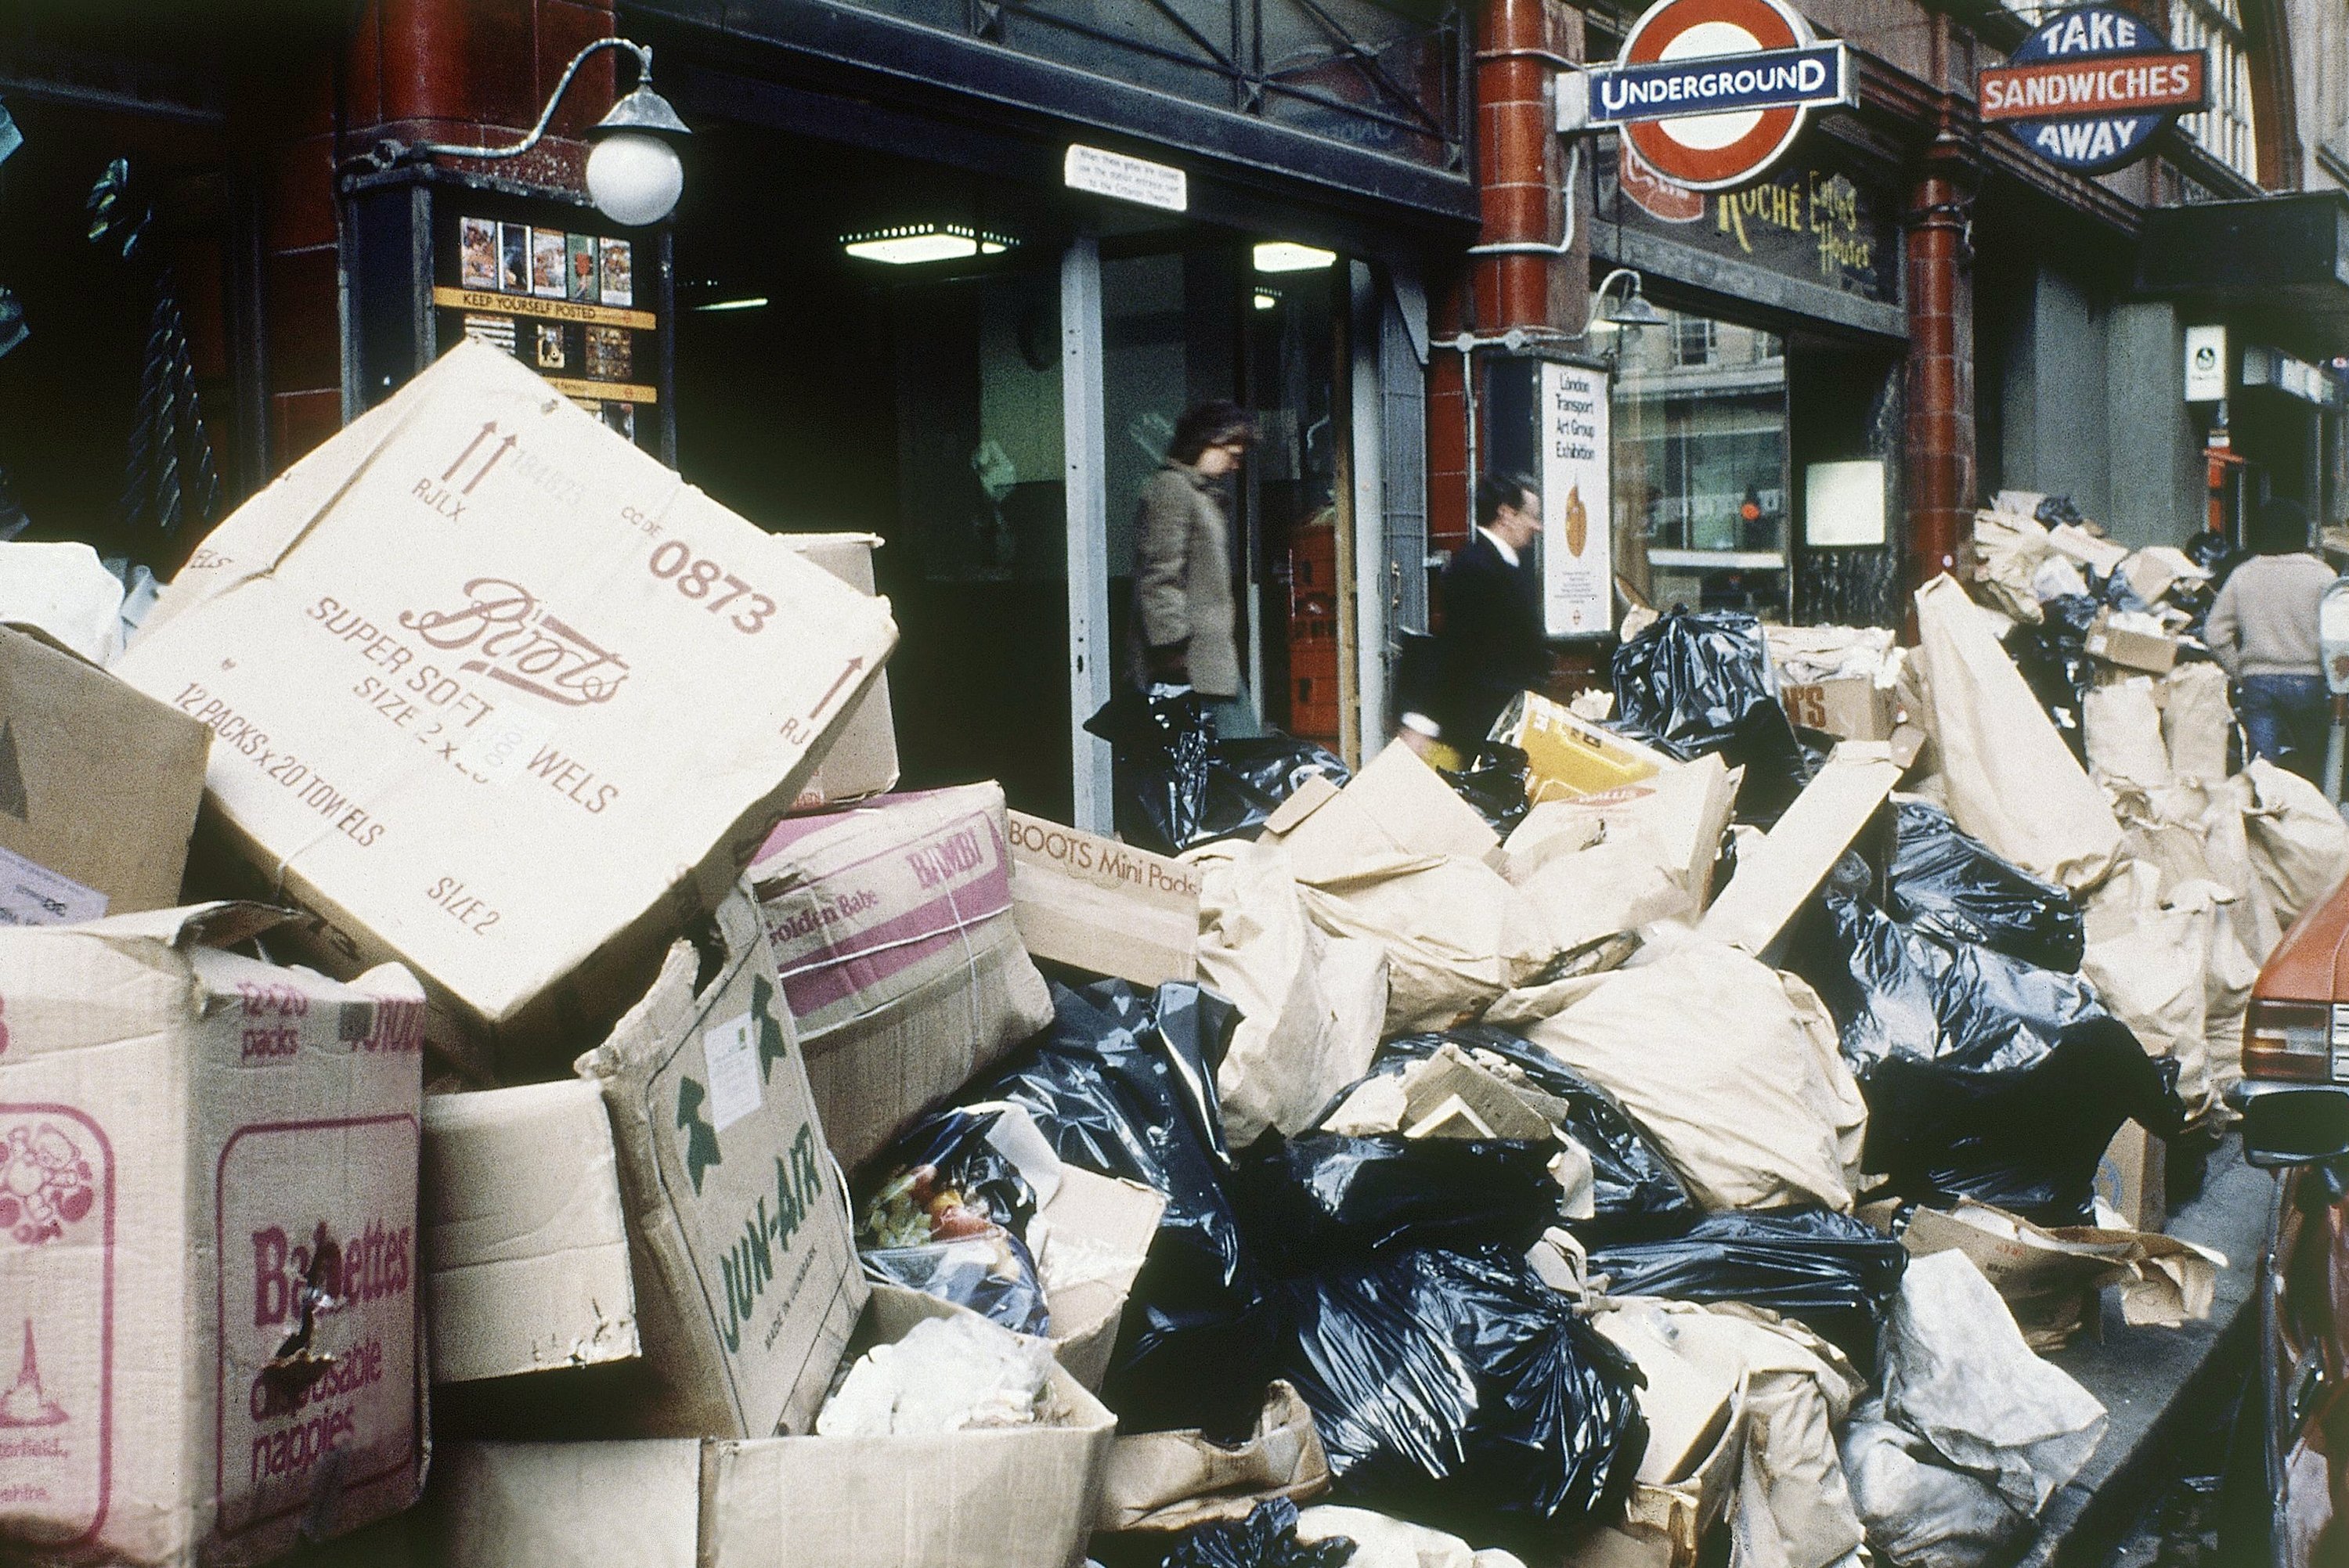 Trash piles up in London during labor strike in 1970s. 